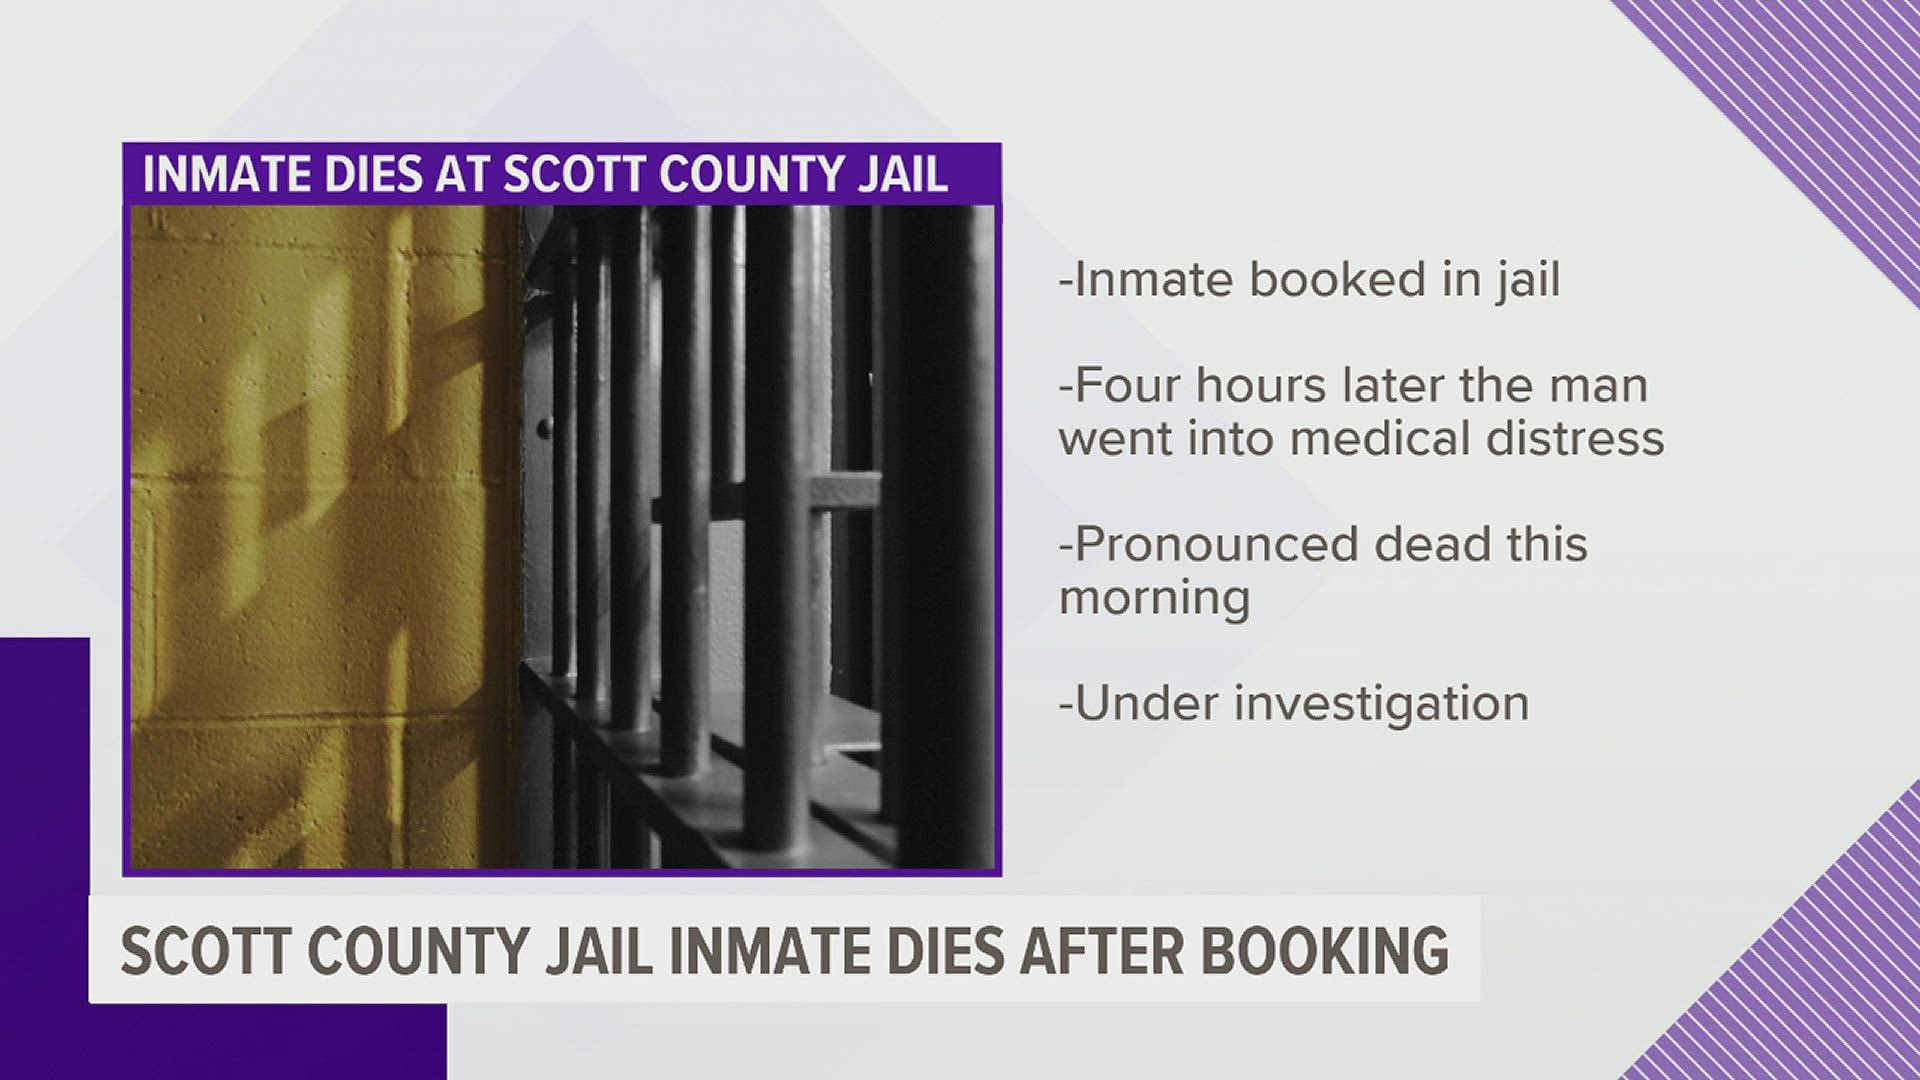 The Iowa Division of Criminal Investigation is investigating the death of an unidentified inmate. An autopsy will be performed "in the near future."